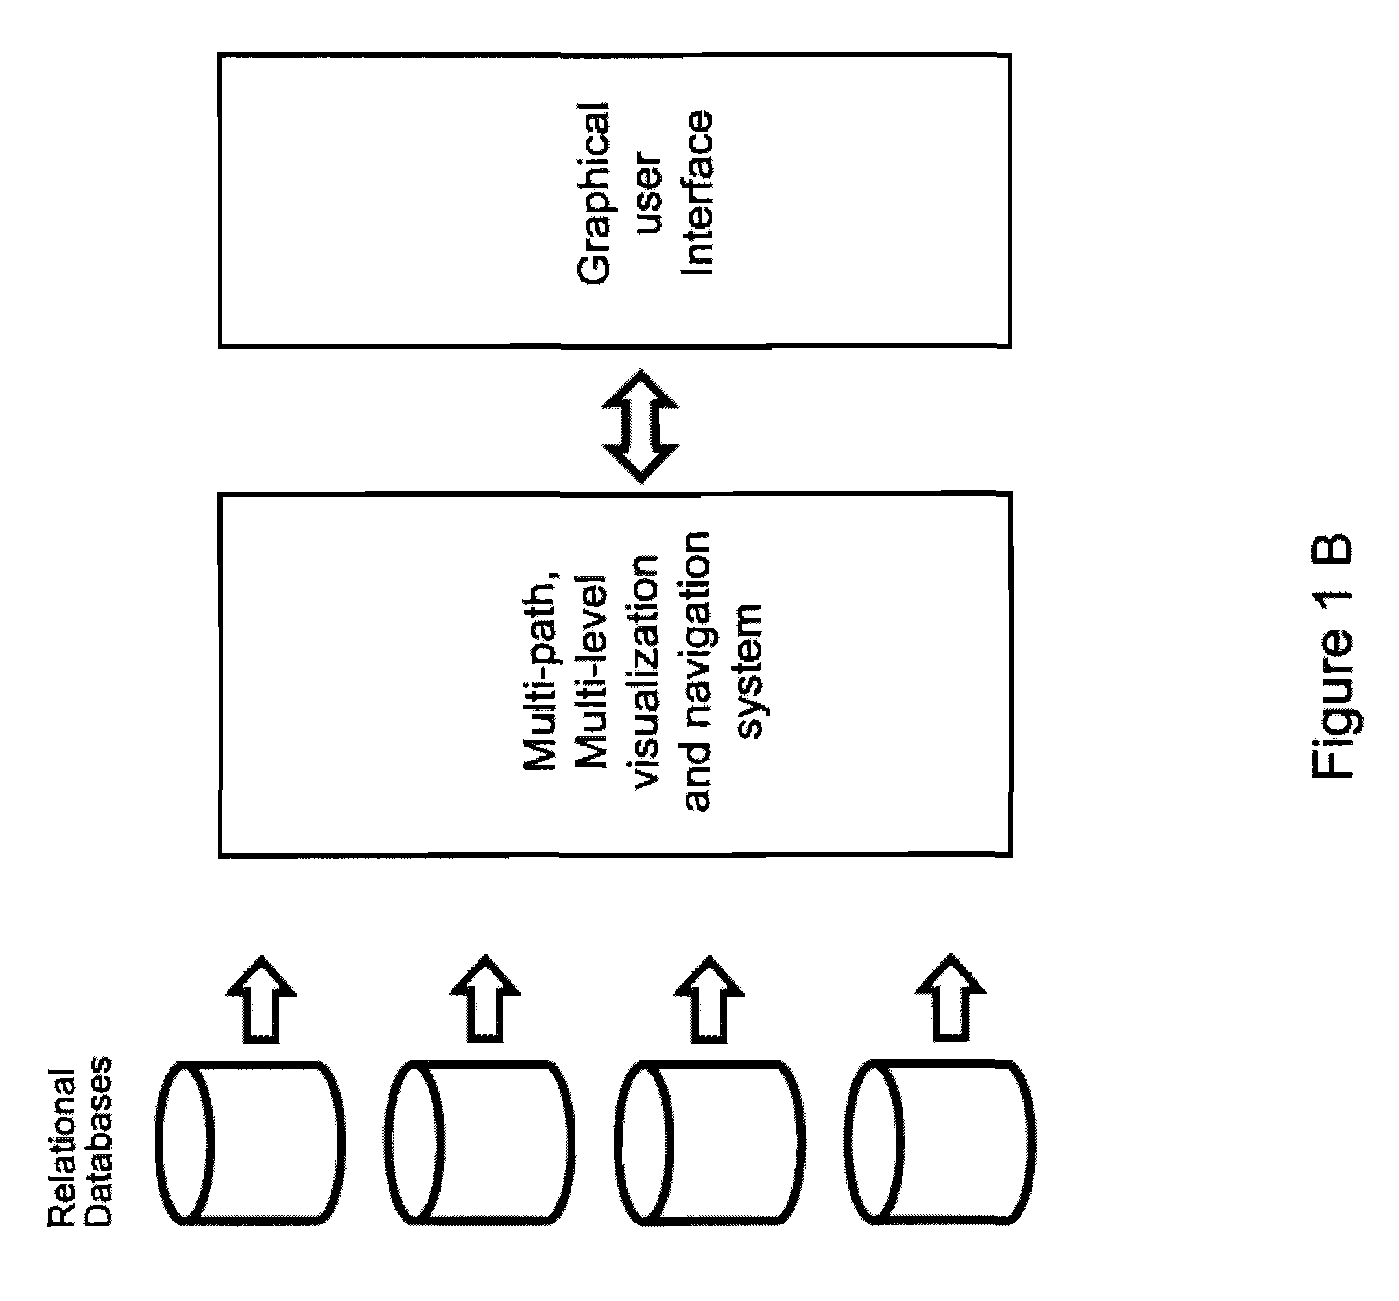 Method and system for navigation and visualization of data in relational and/or multidimensional databases